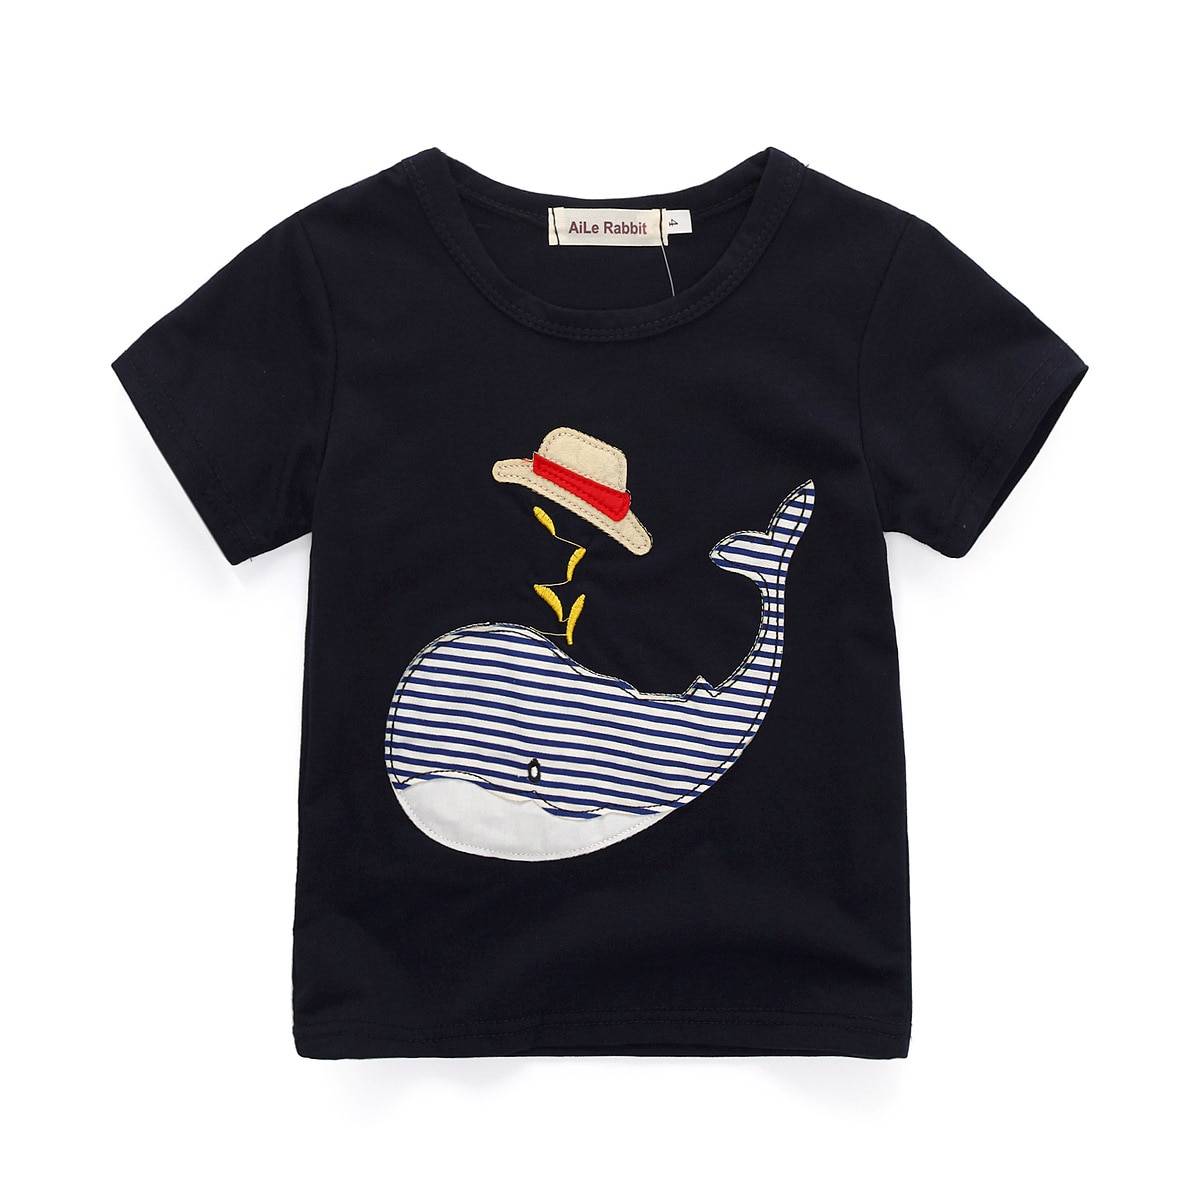 Whale T-Shirt and Denim Pants Cotton Clothing Set for Boys Boys Clothing Kids a61dc102c047f8682bf539: 2T|3T|4T|5|6|7